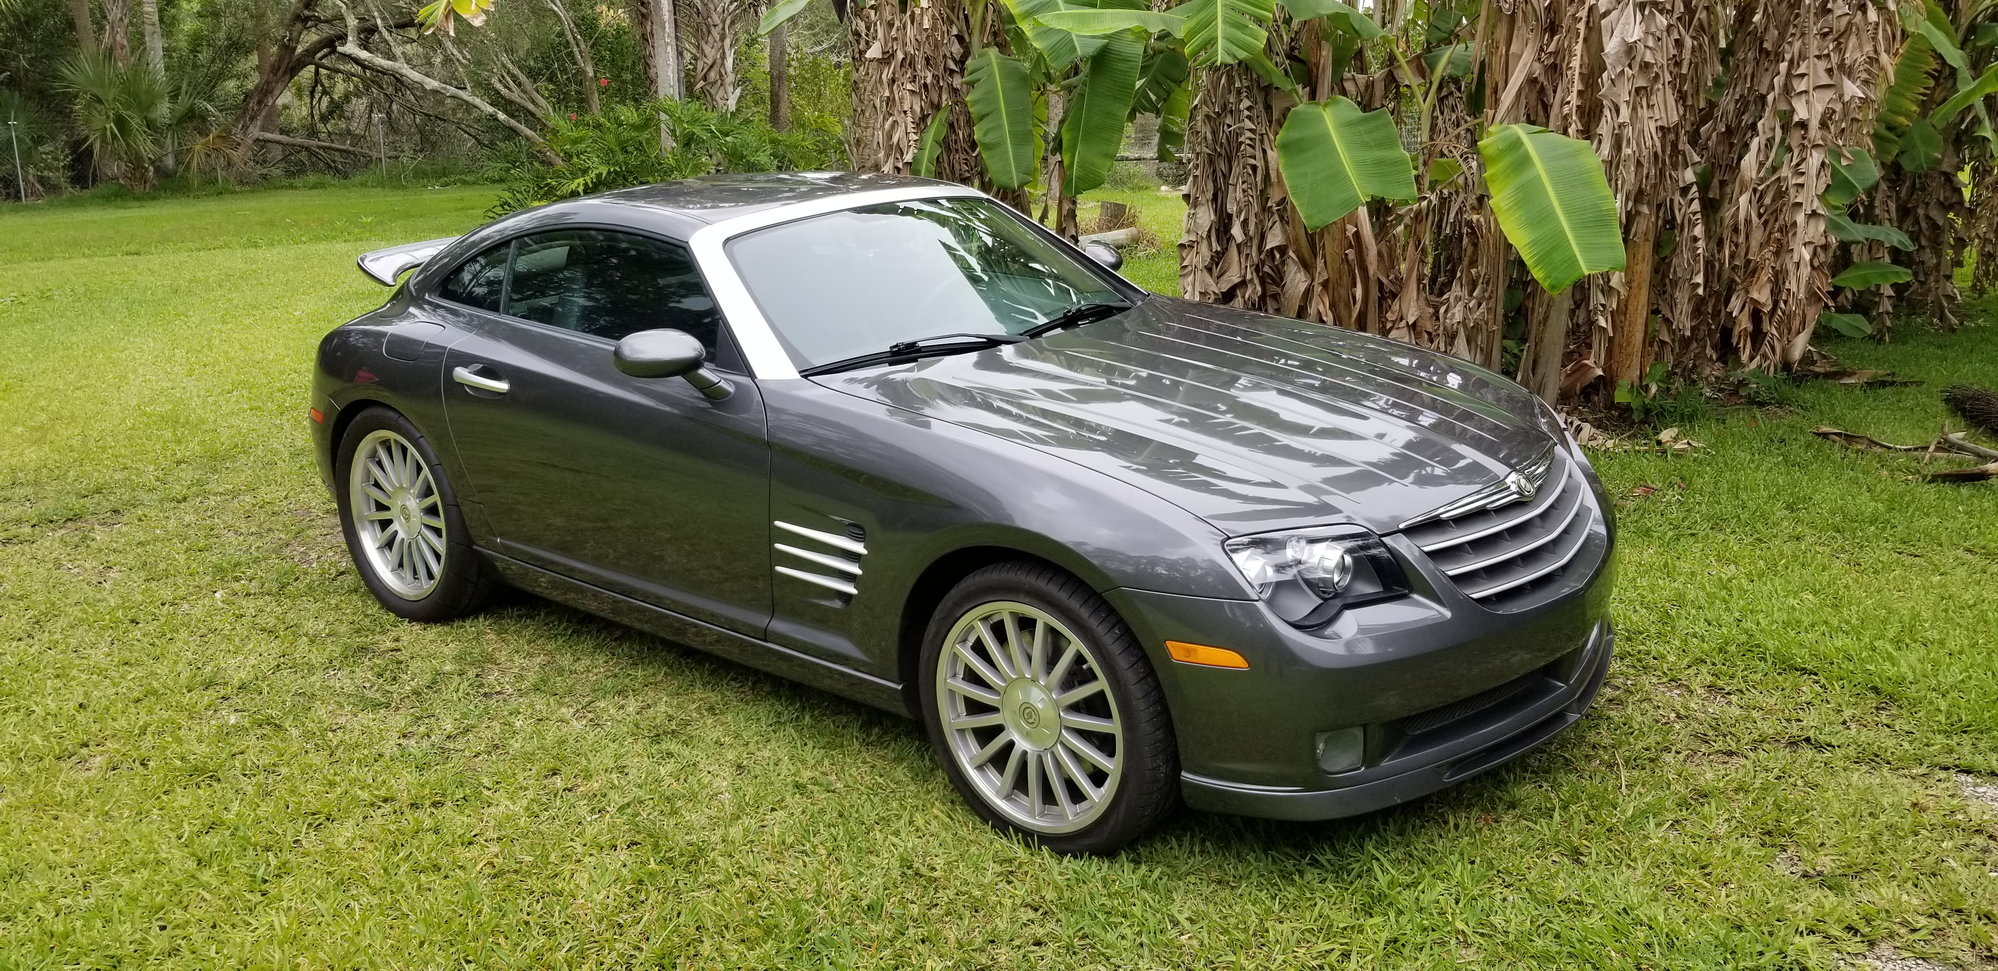 2005 Chrysler Crossfire - SRT 6 For Sale in Florida - Used - VIN 5X040344 - 42,052 Miles - 6 cyl - 2WD - Automatic - Coupe - Other - Edgewater, FL 32132, United States